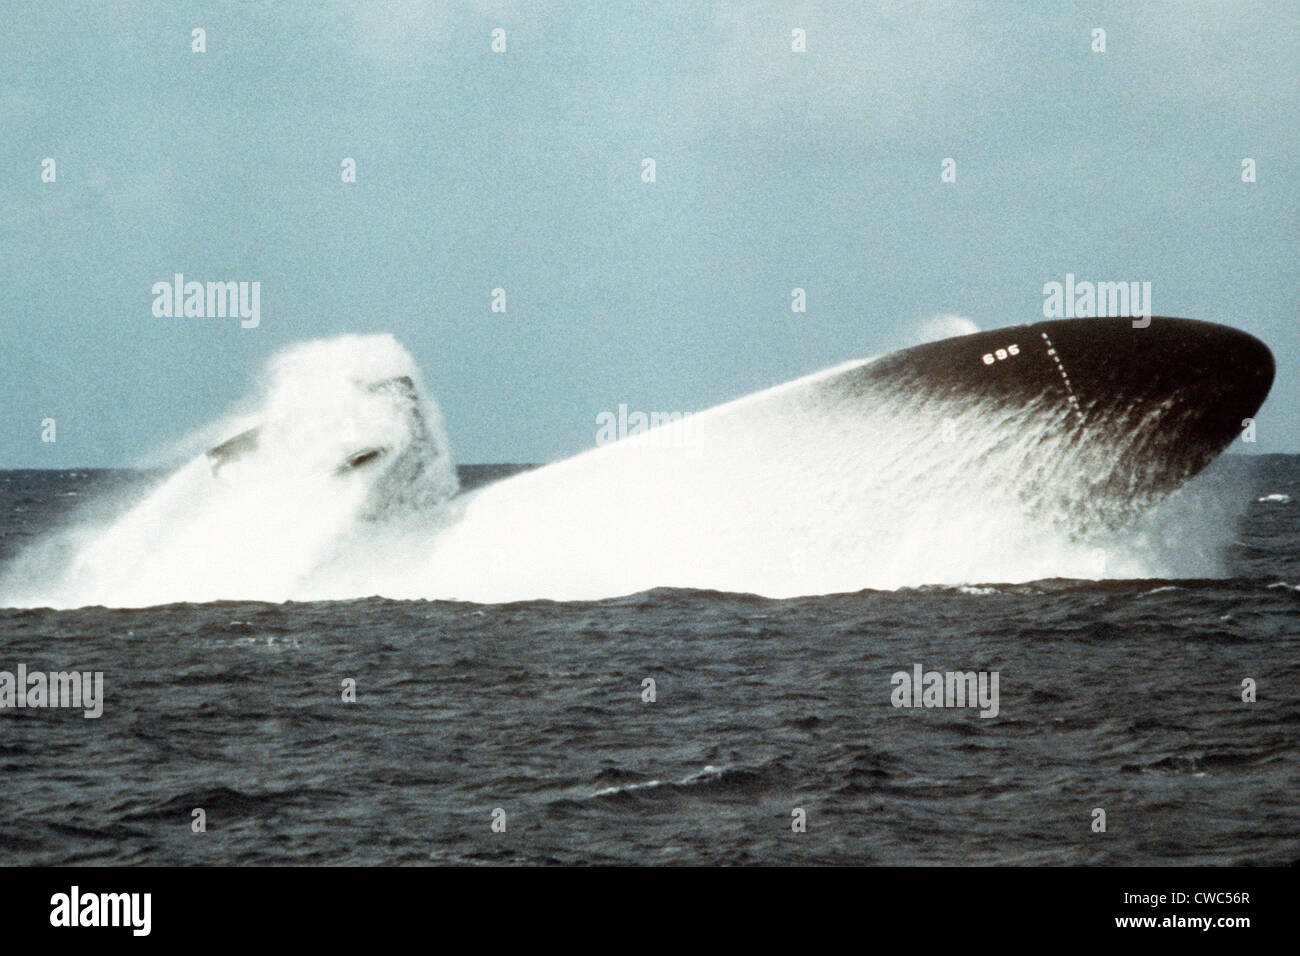 The nuclear-powered attack submarine BIRMINGHAM conducting an emergency surfacing exercise during sea trials. Nov. 19 1978. Stock Photo